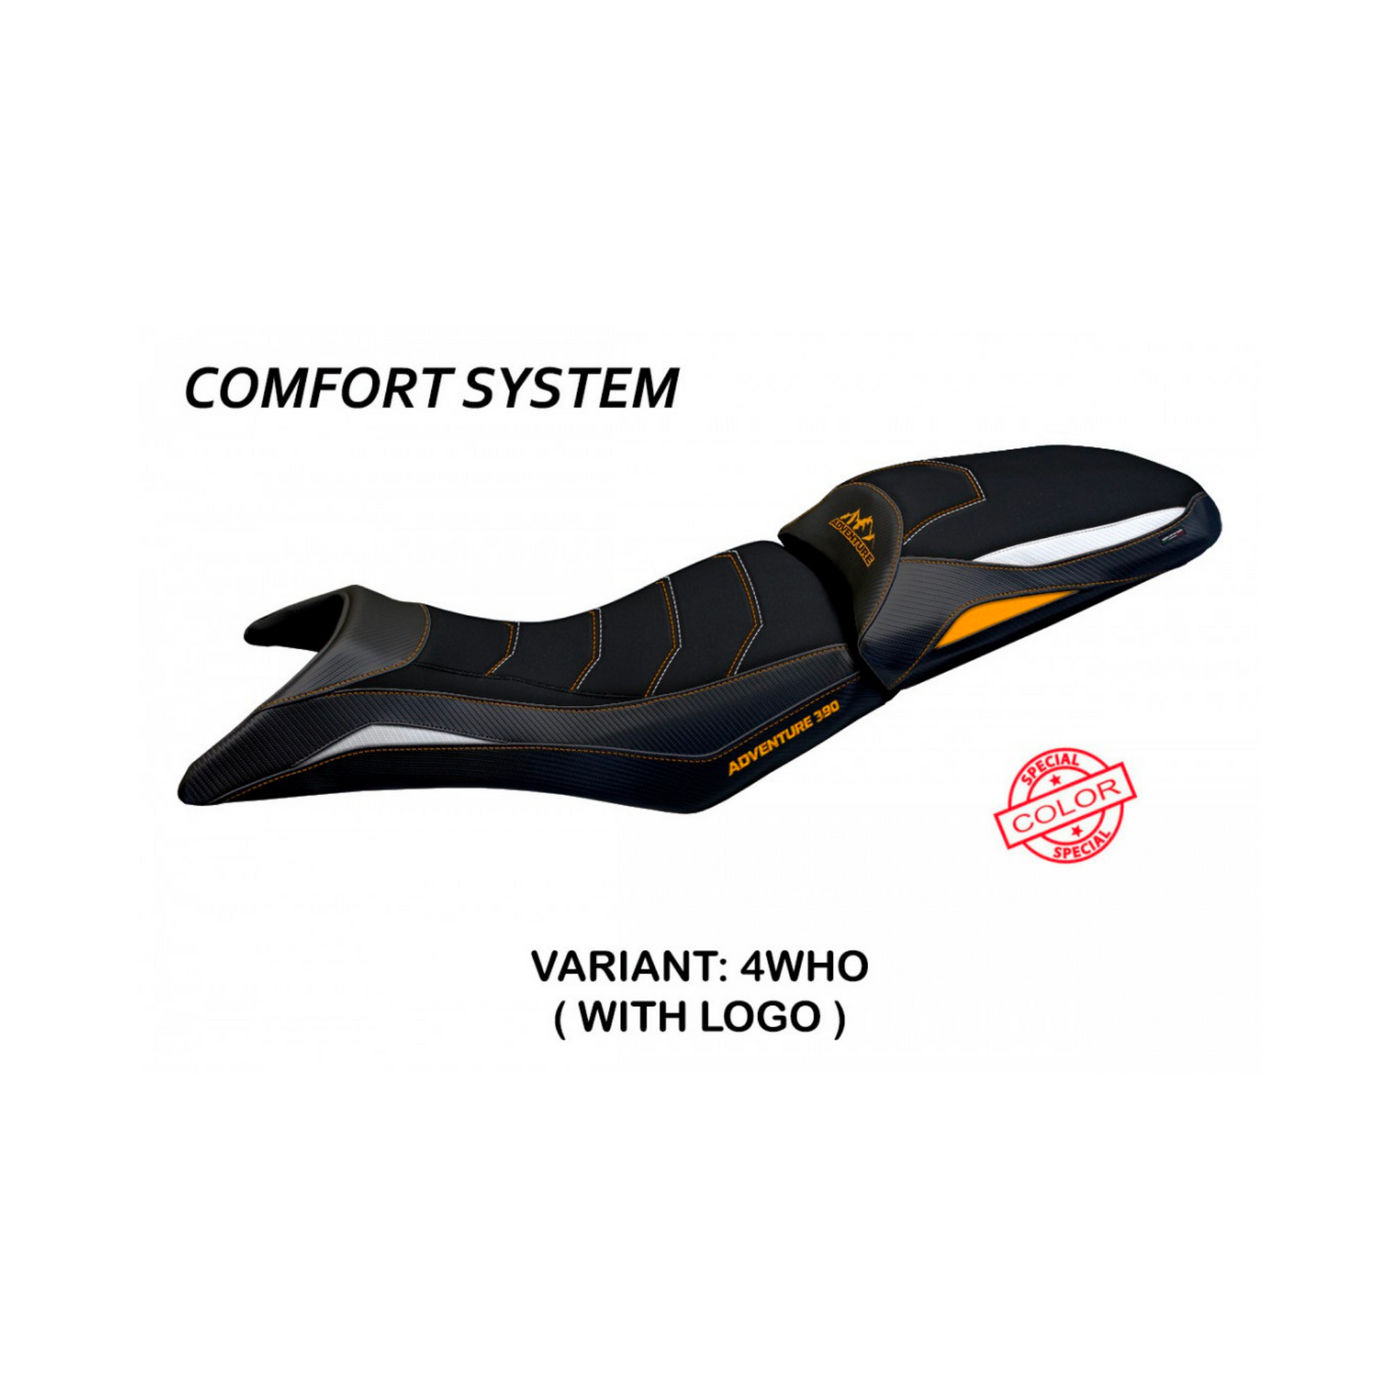 Star Comfort System Seat Cover for KTM 390 Adventure (2020-2022)